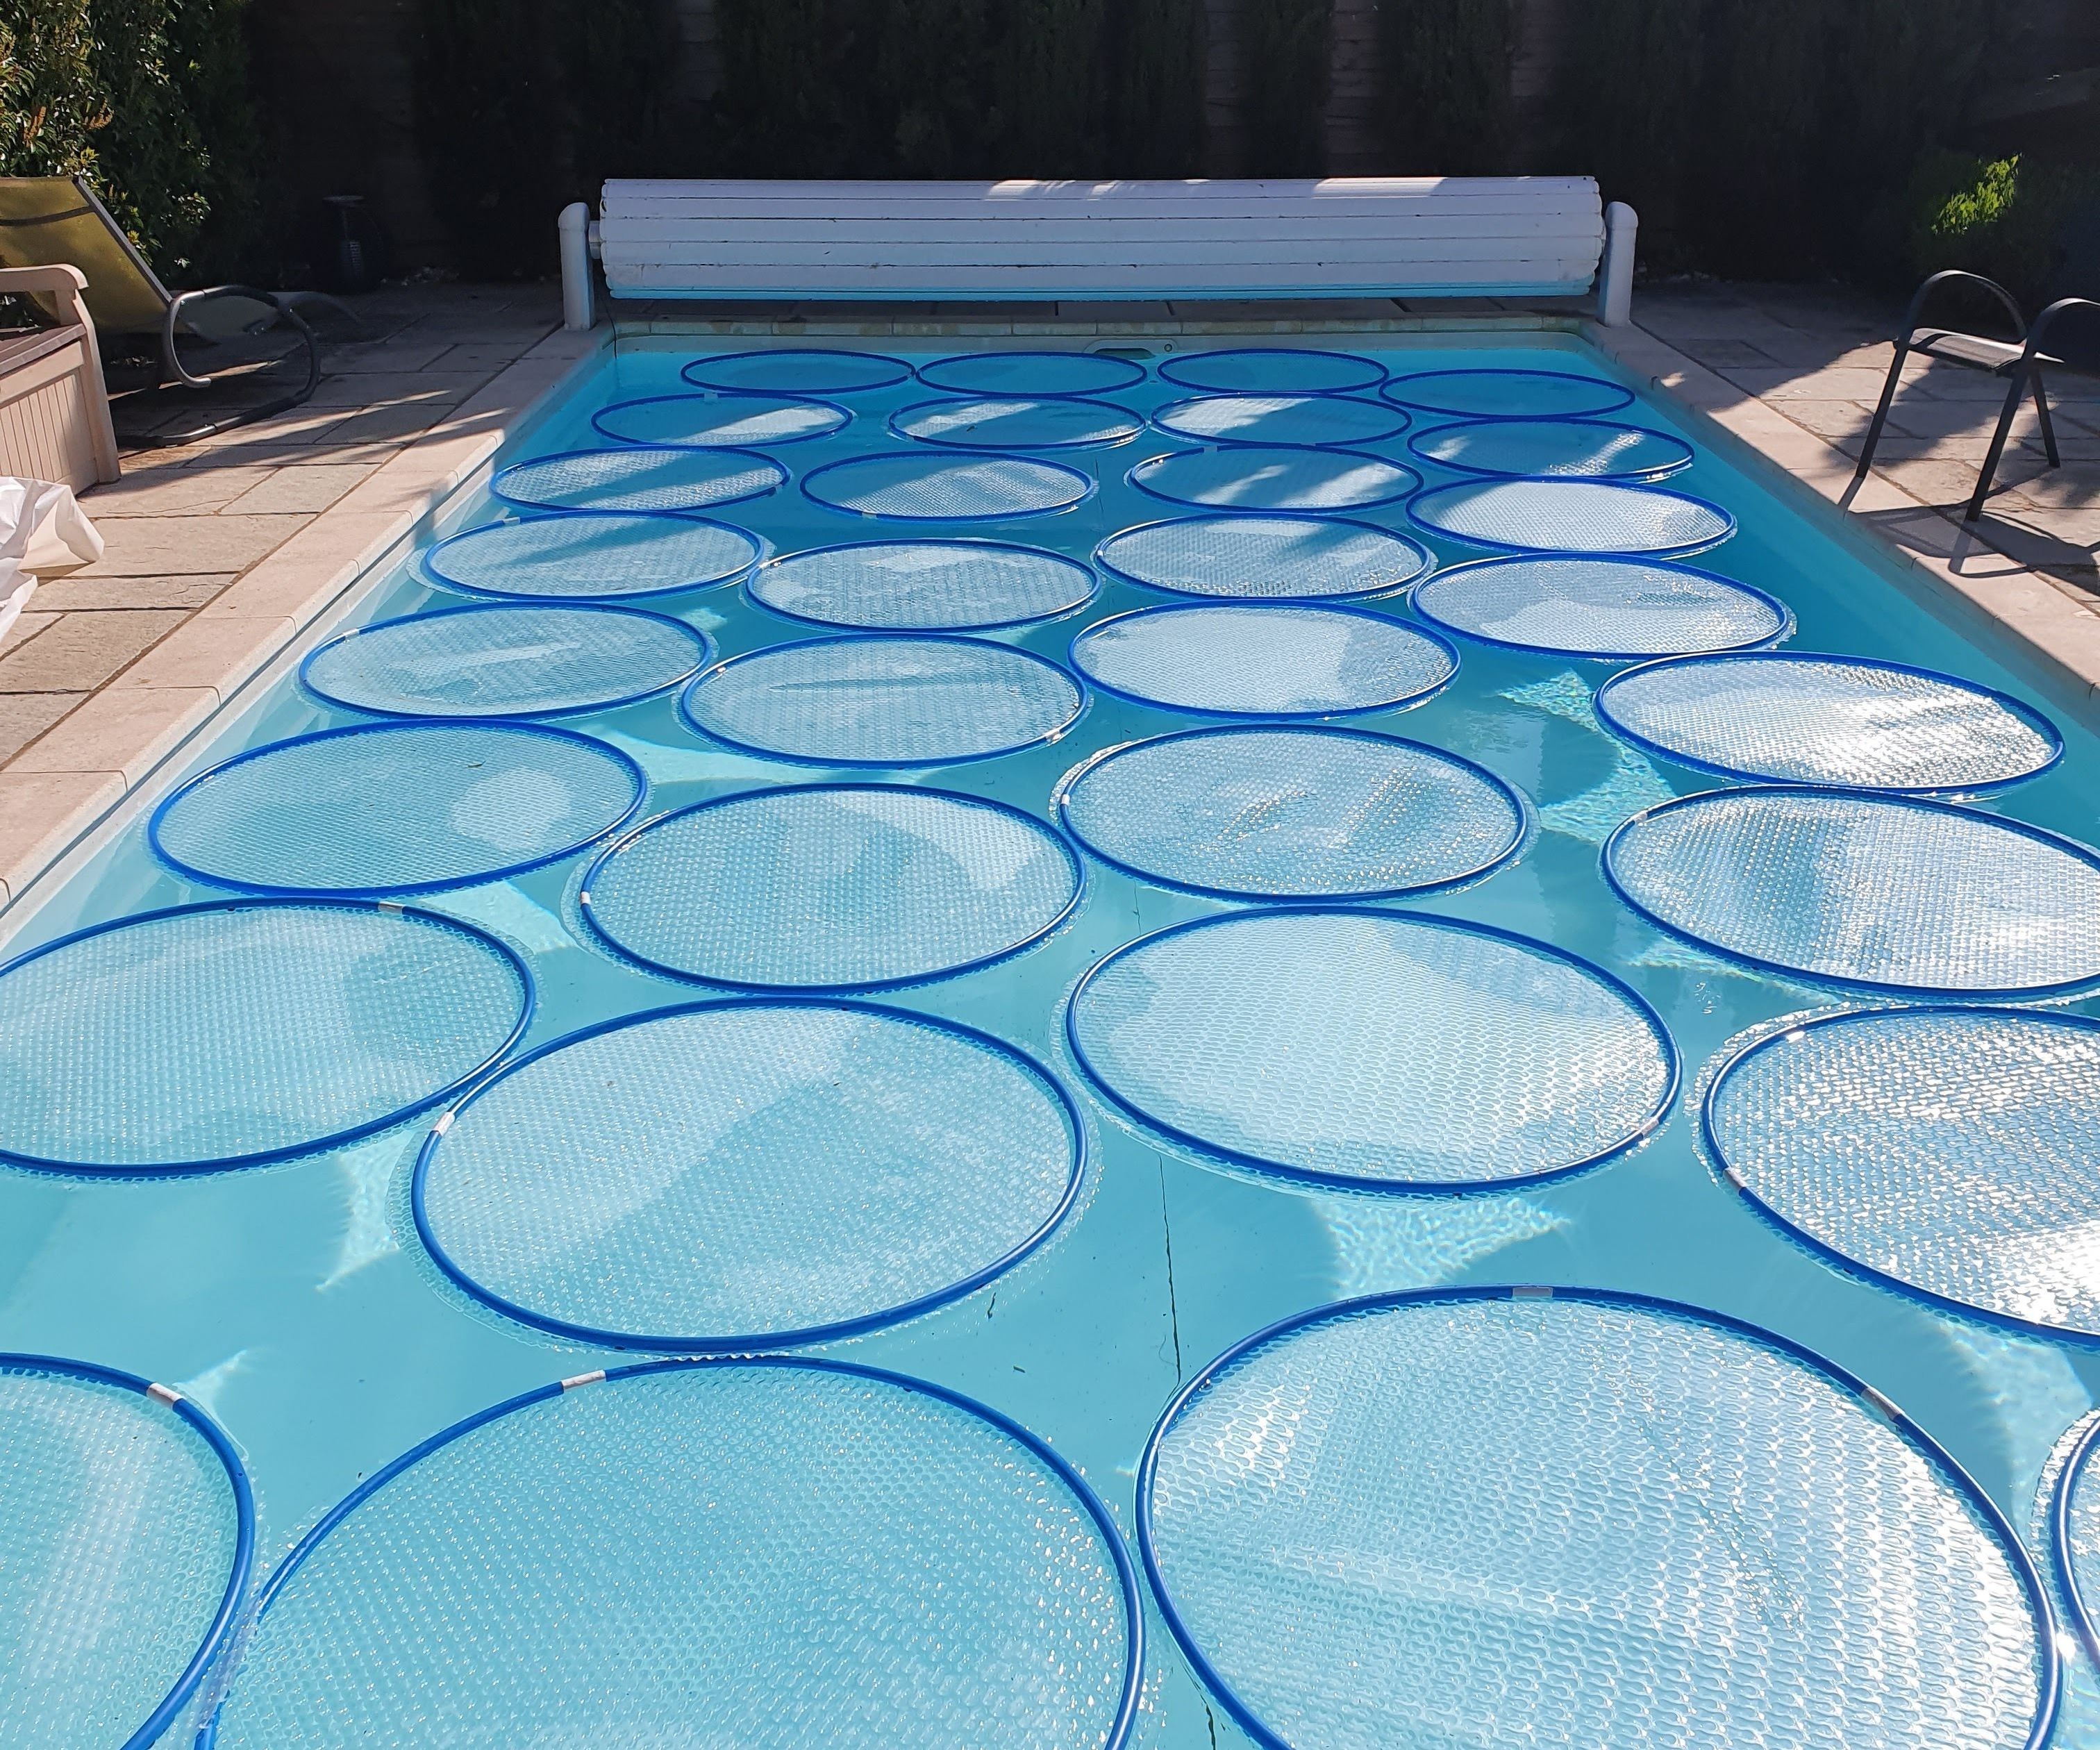 Heat Your Pool With Solar Lily Pads